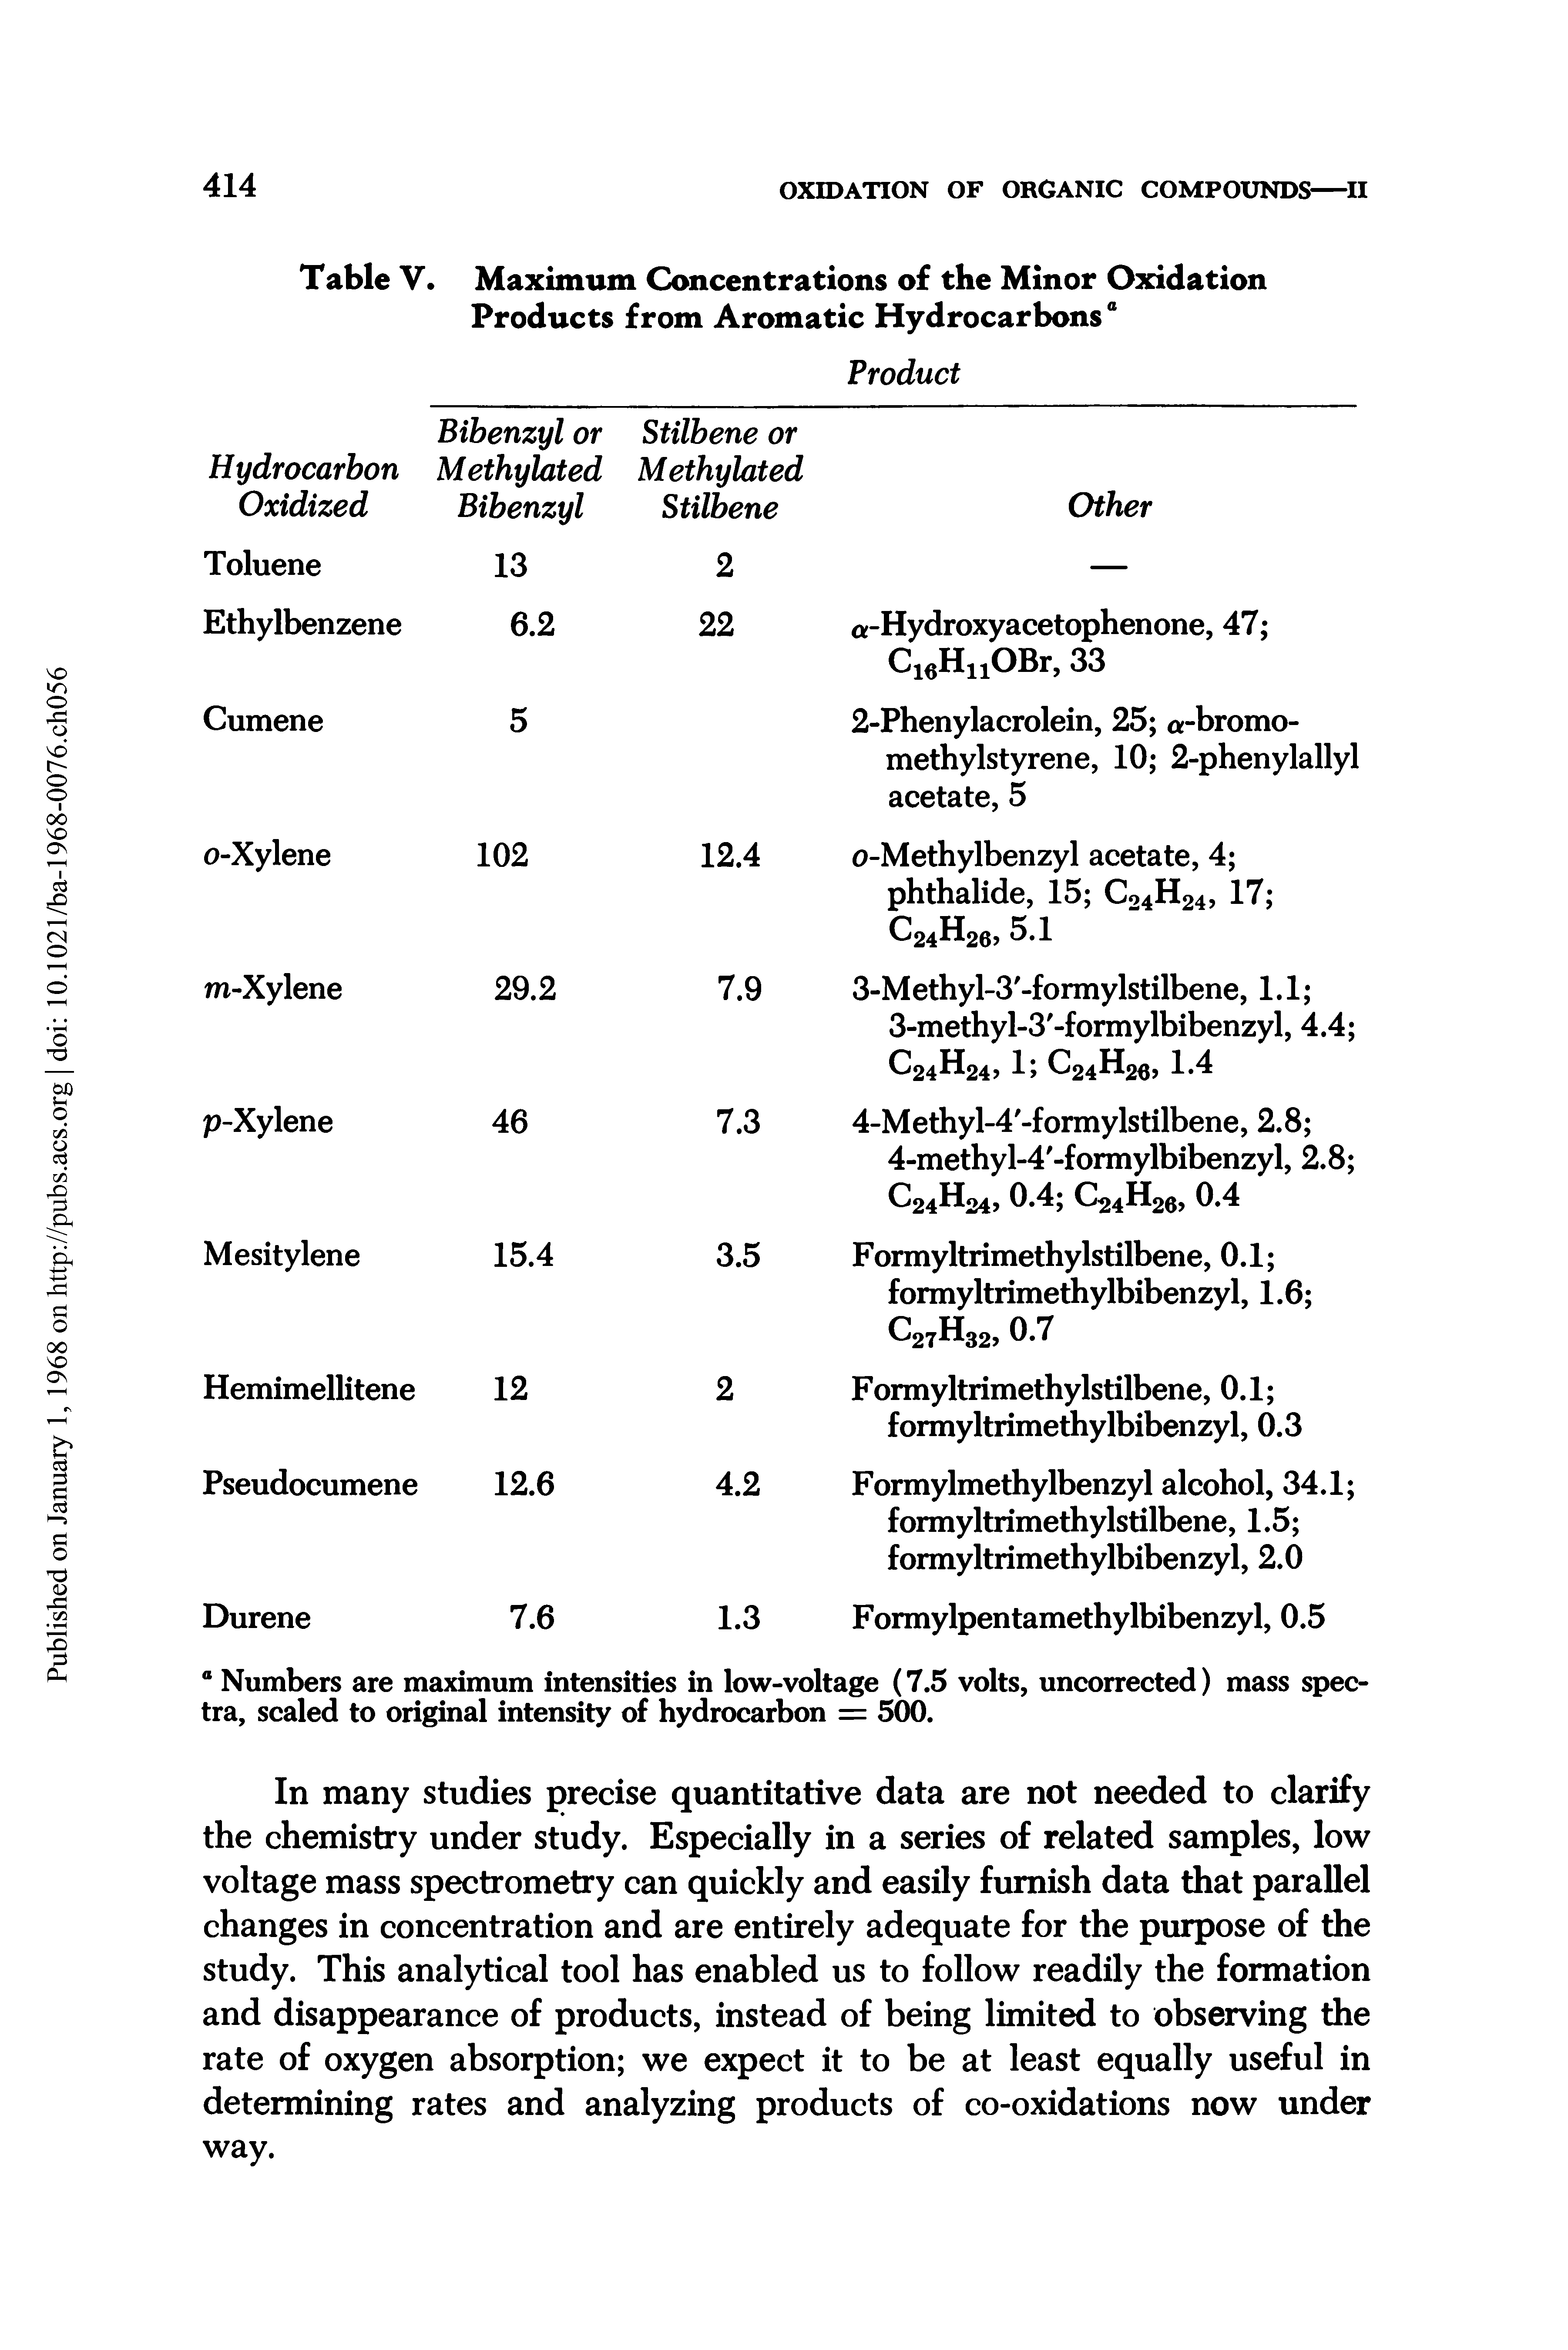 Table V. Maximum Concentrations of the Minor Oxidation Products from Aromatic Hydrocarbons °...